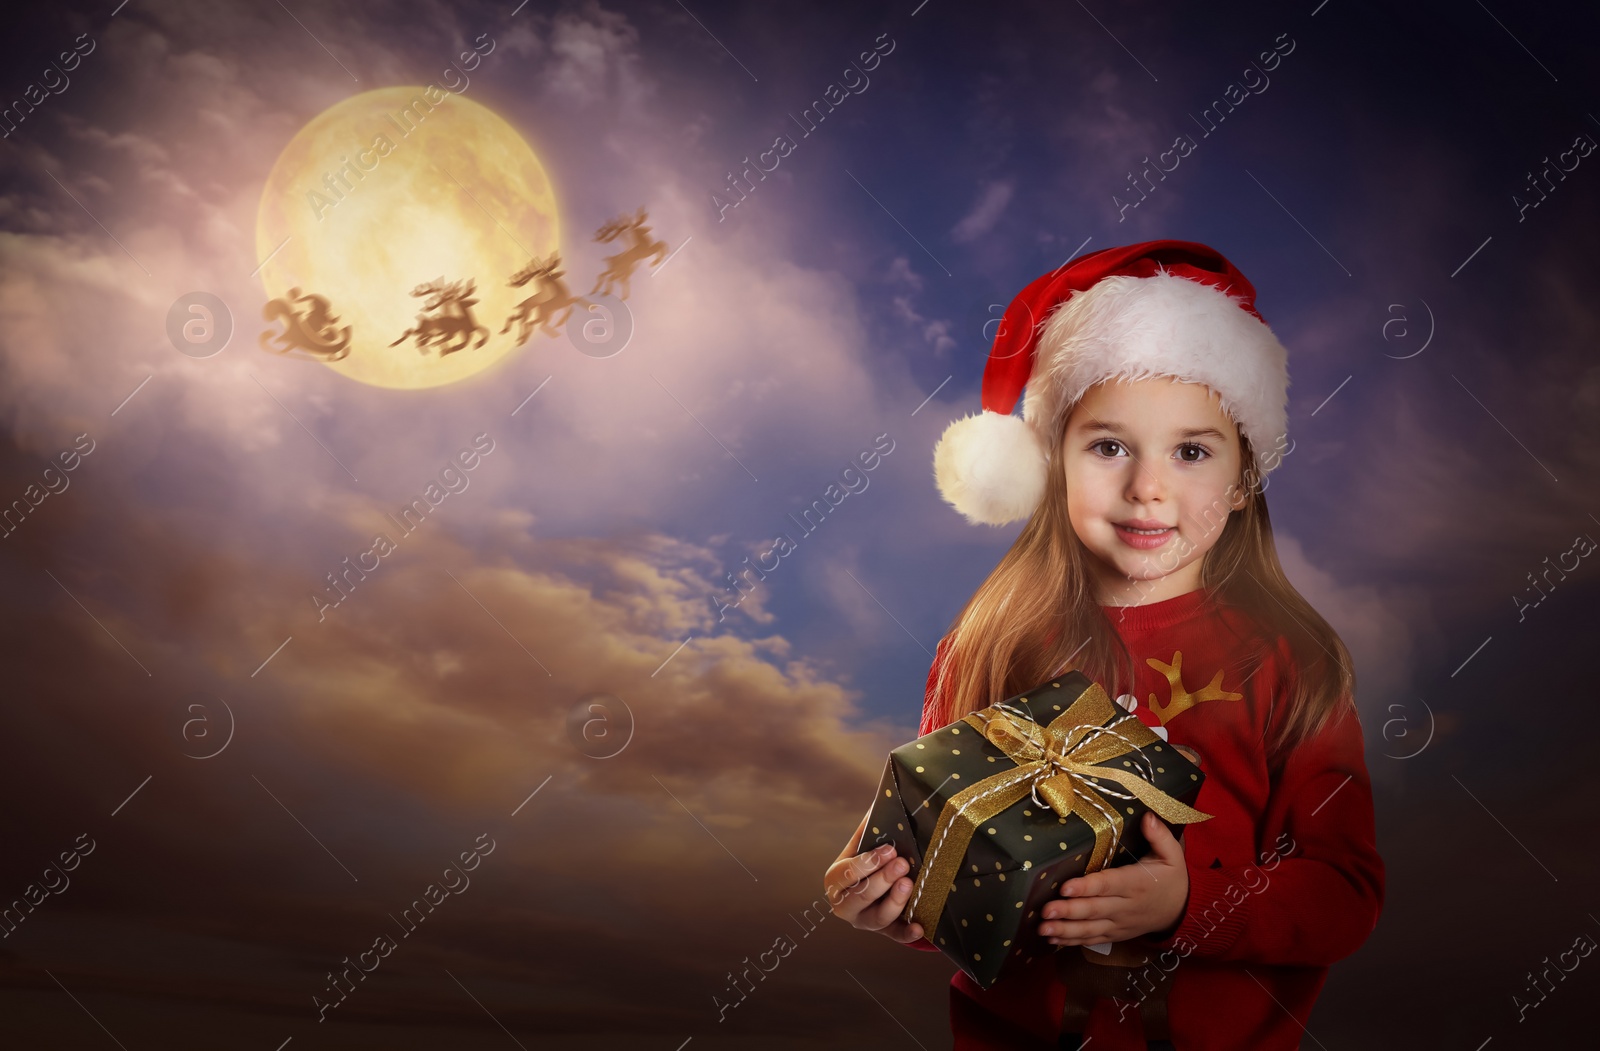 Image of Cute child with Christmas gift and Santa Claus flying in his sleigh on background